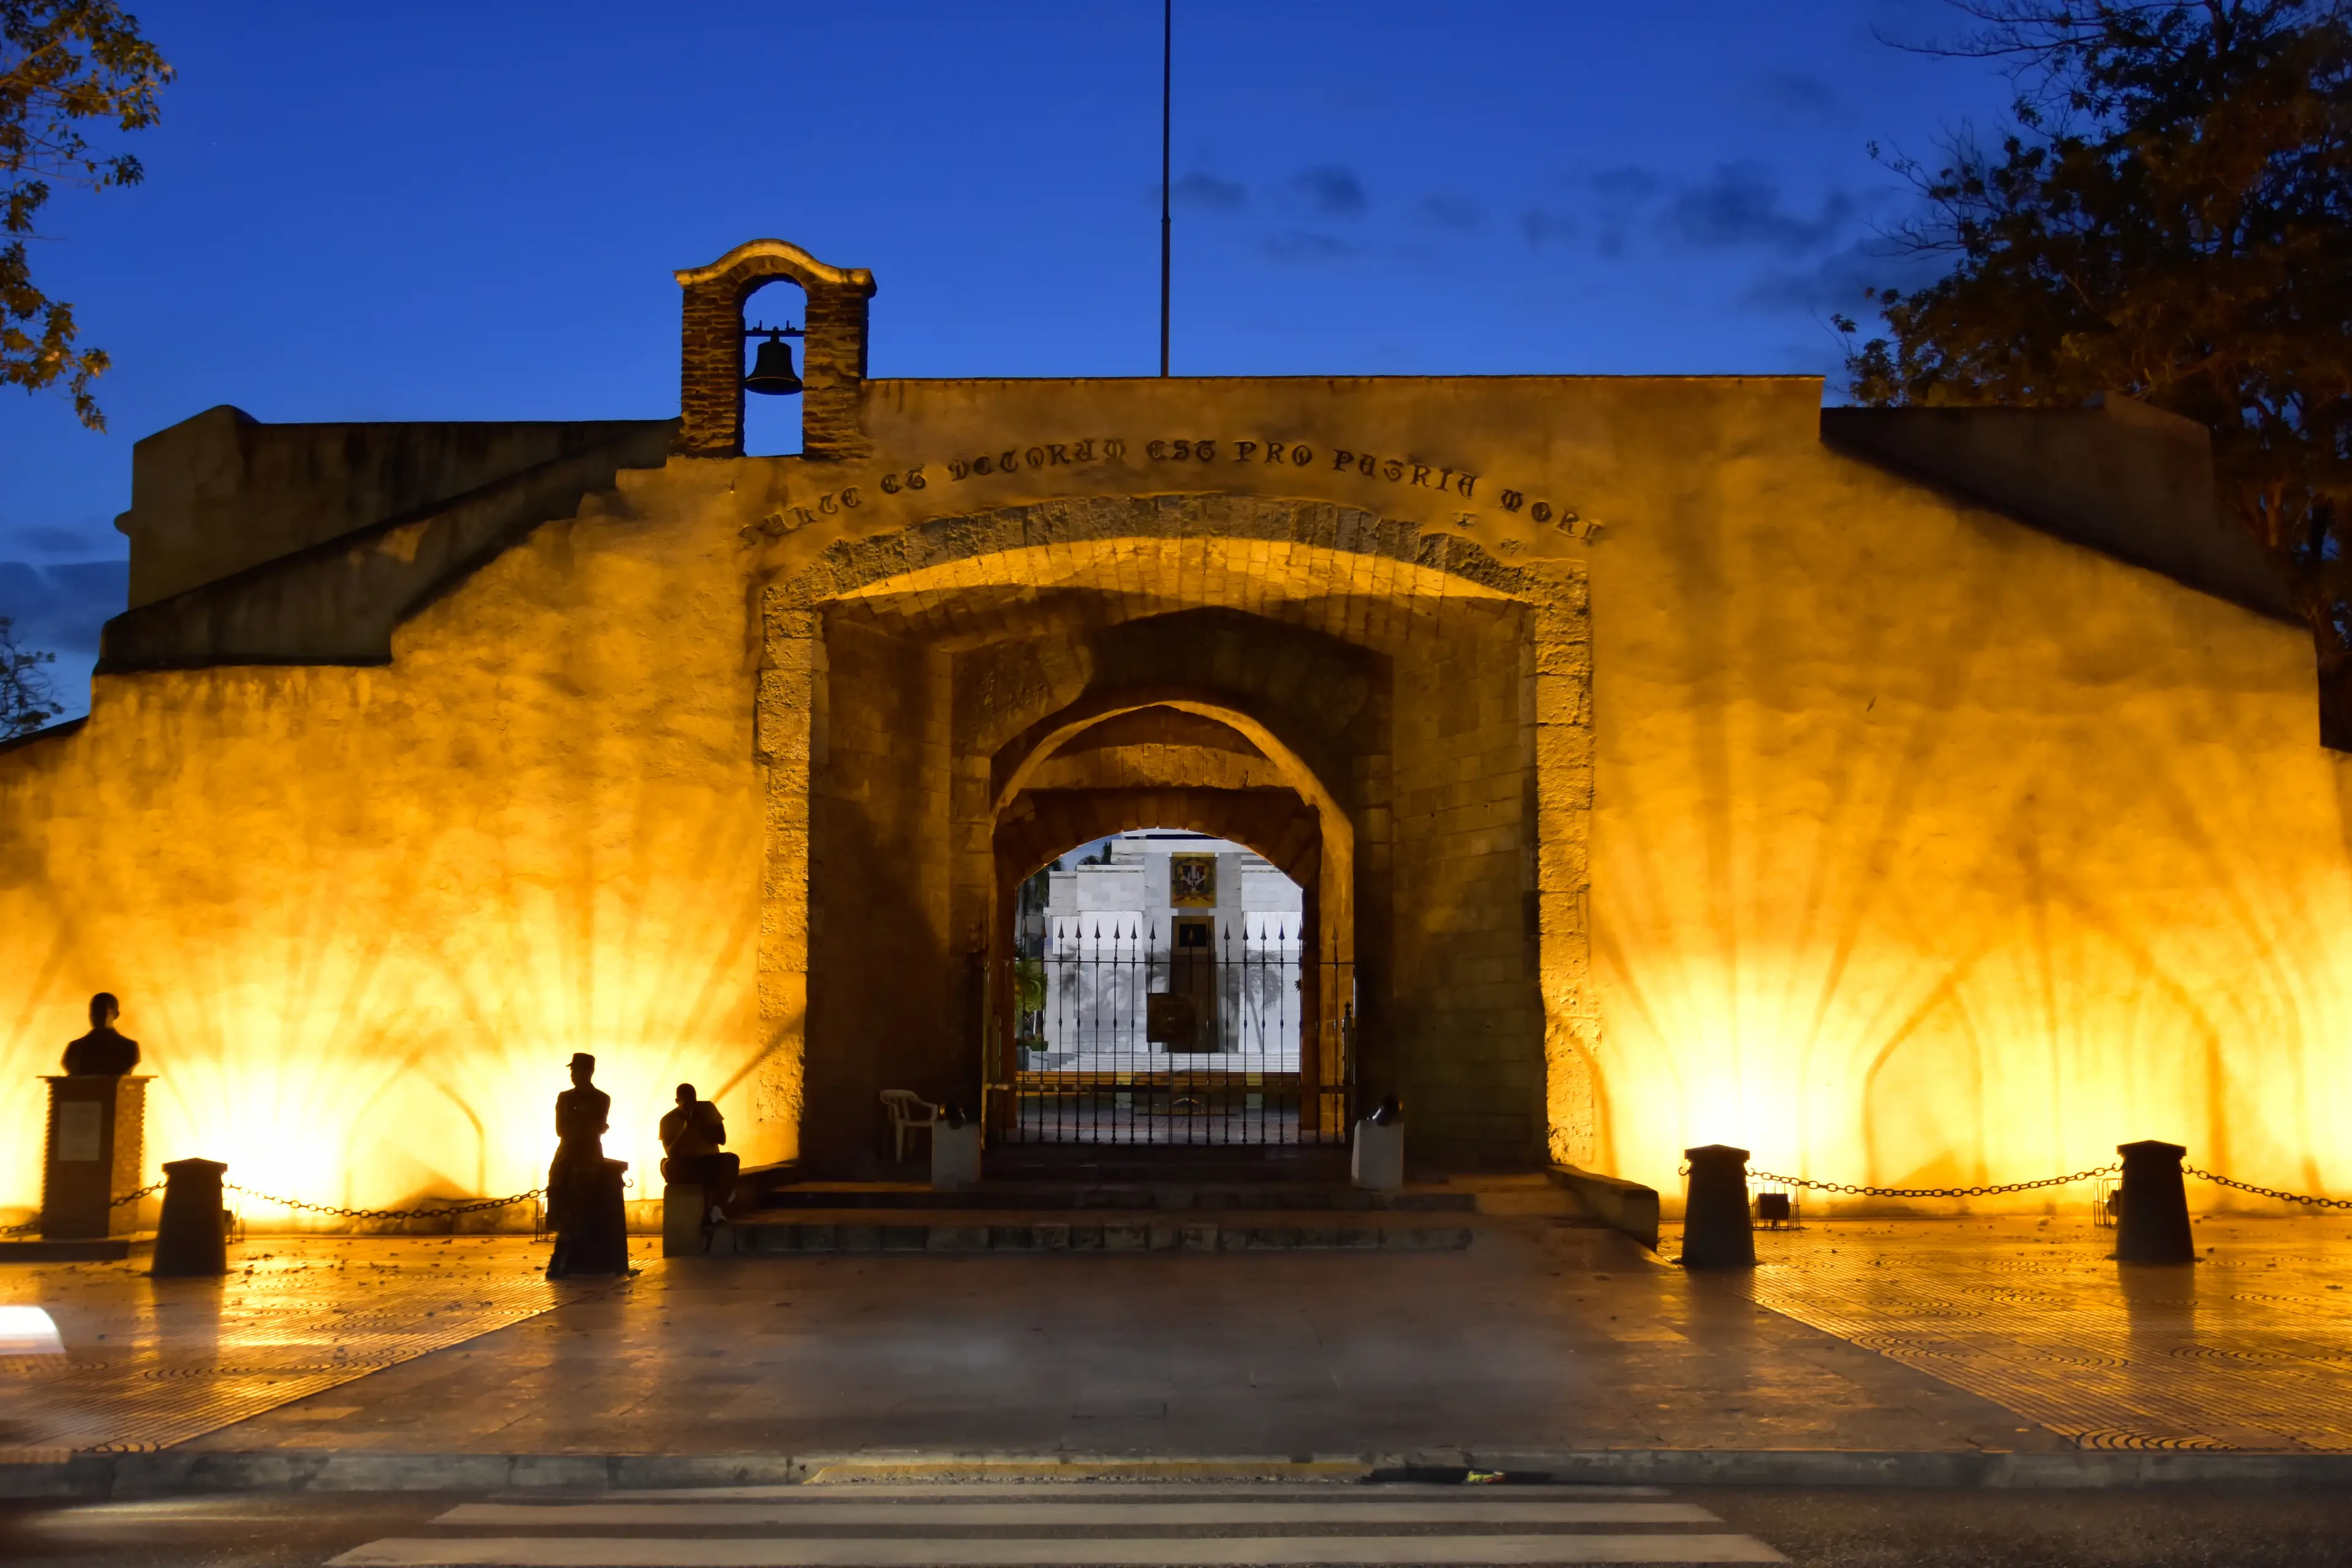 View of the Puerta den Conde at night